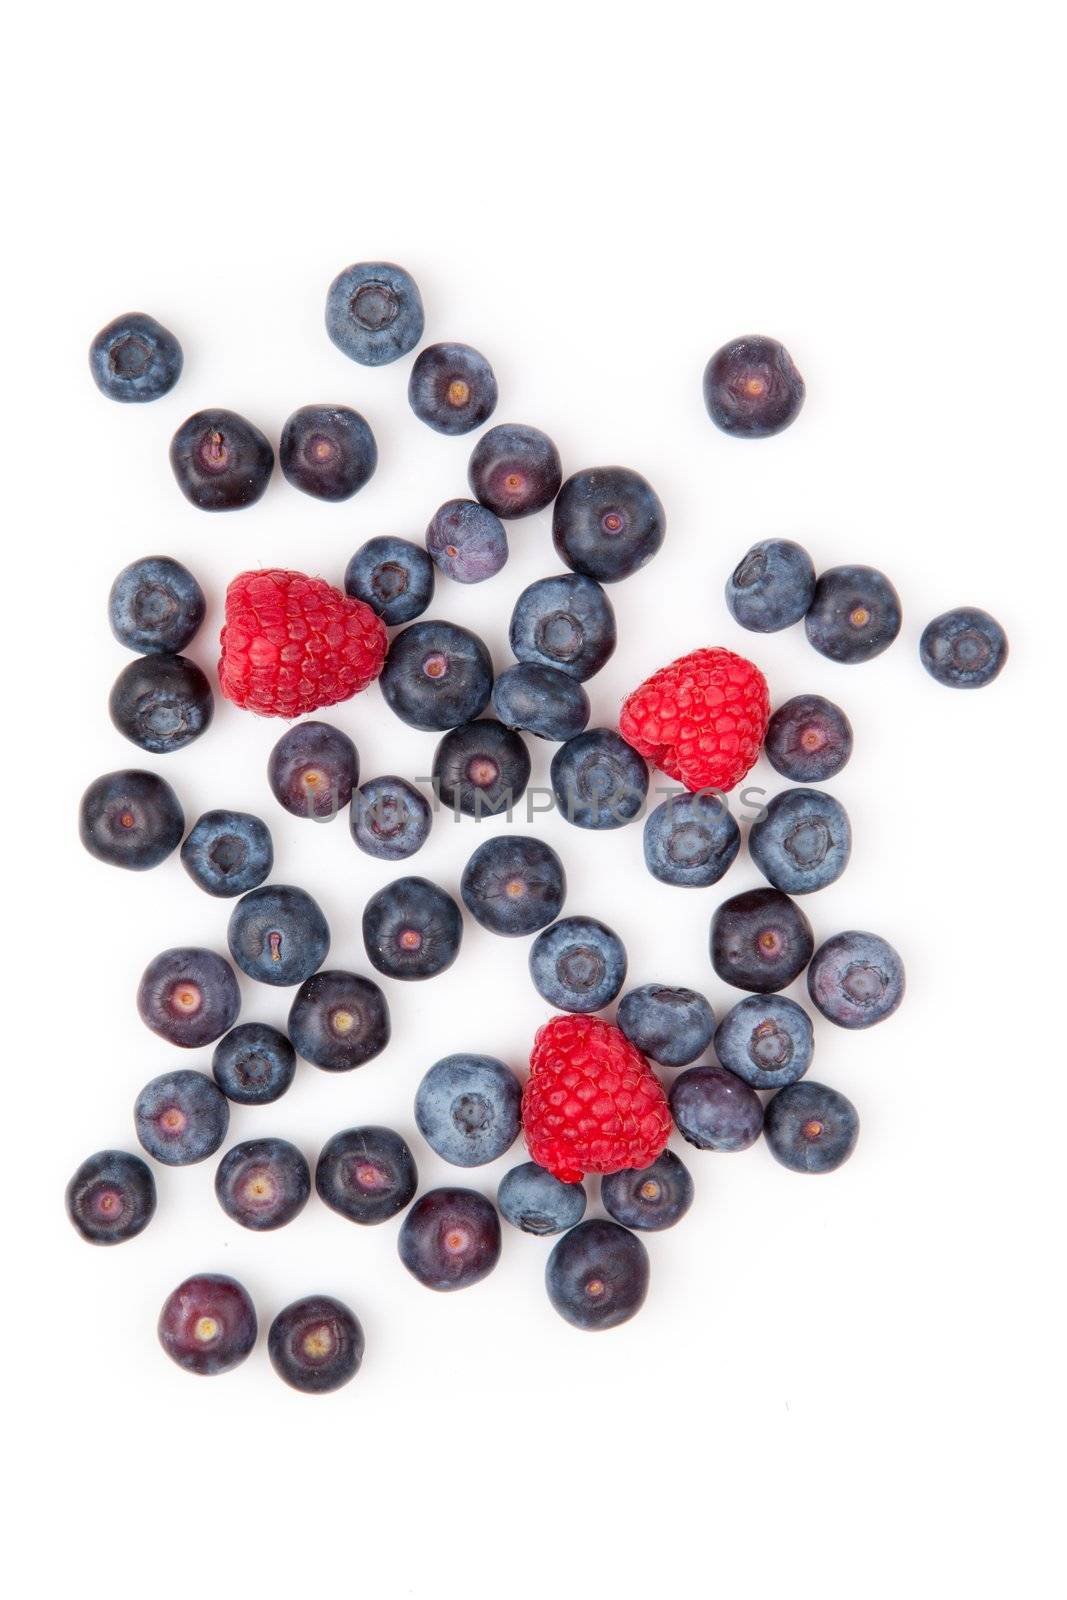 Raspberries and blueberries against a white background